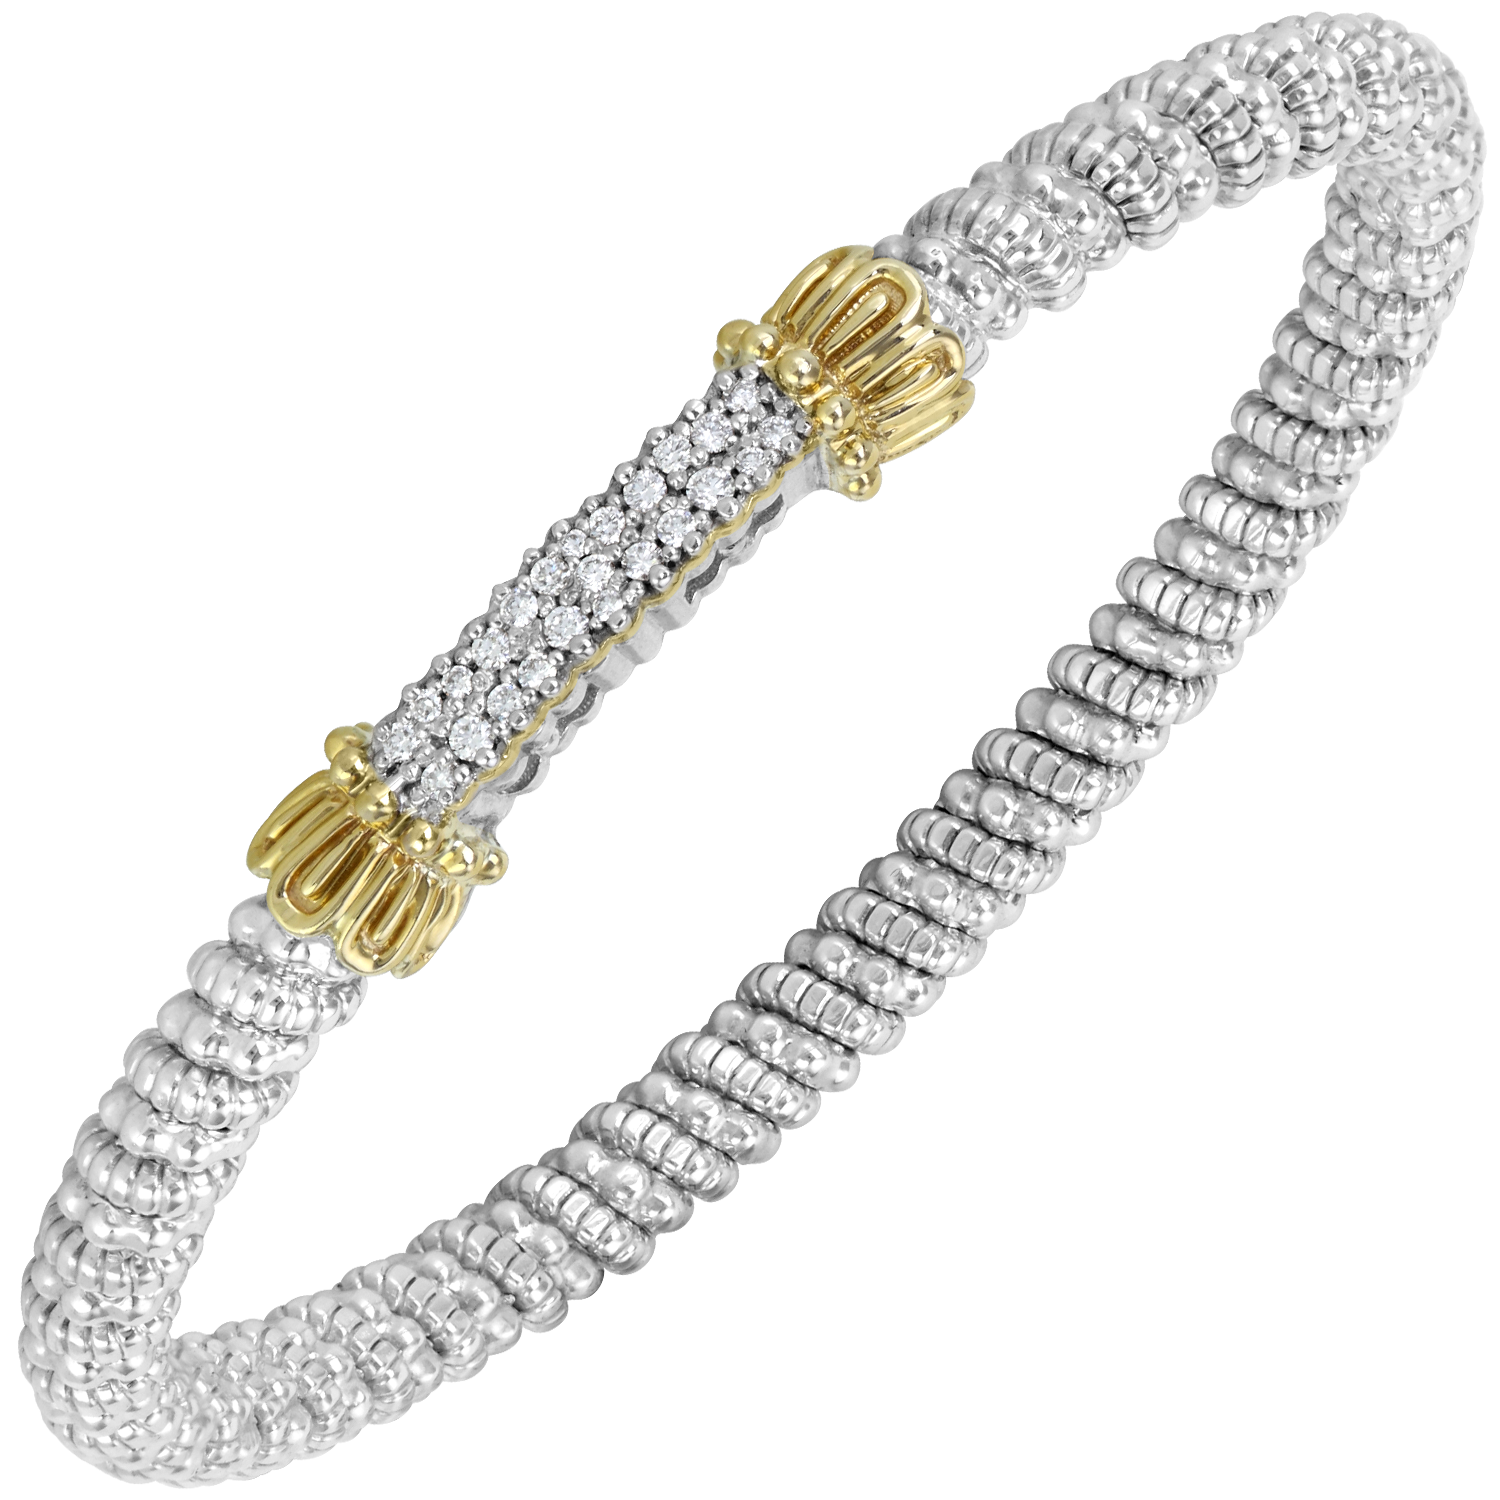 Vahan Sterling Silver & Yellow Gold Diamond Bracelet Galloway and Moseley, Inc. Sumter, SC